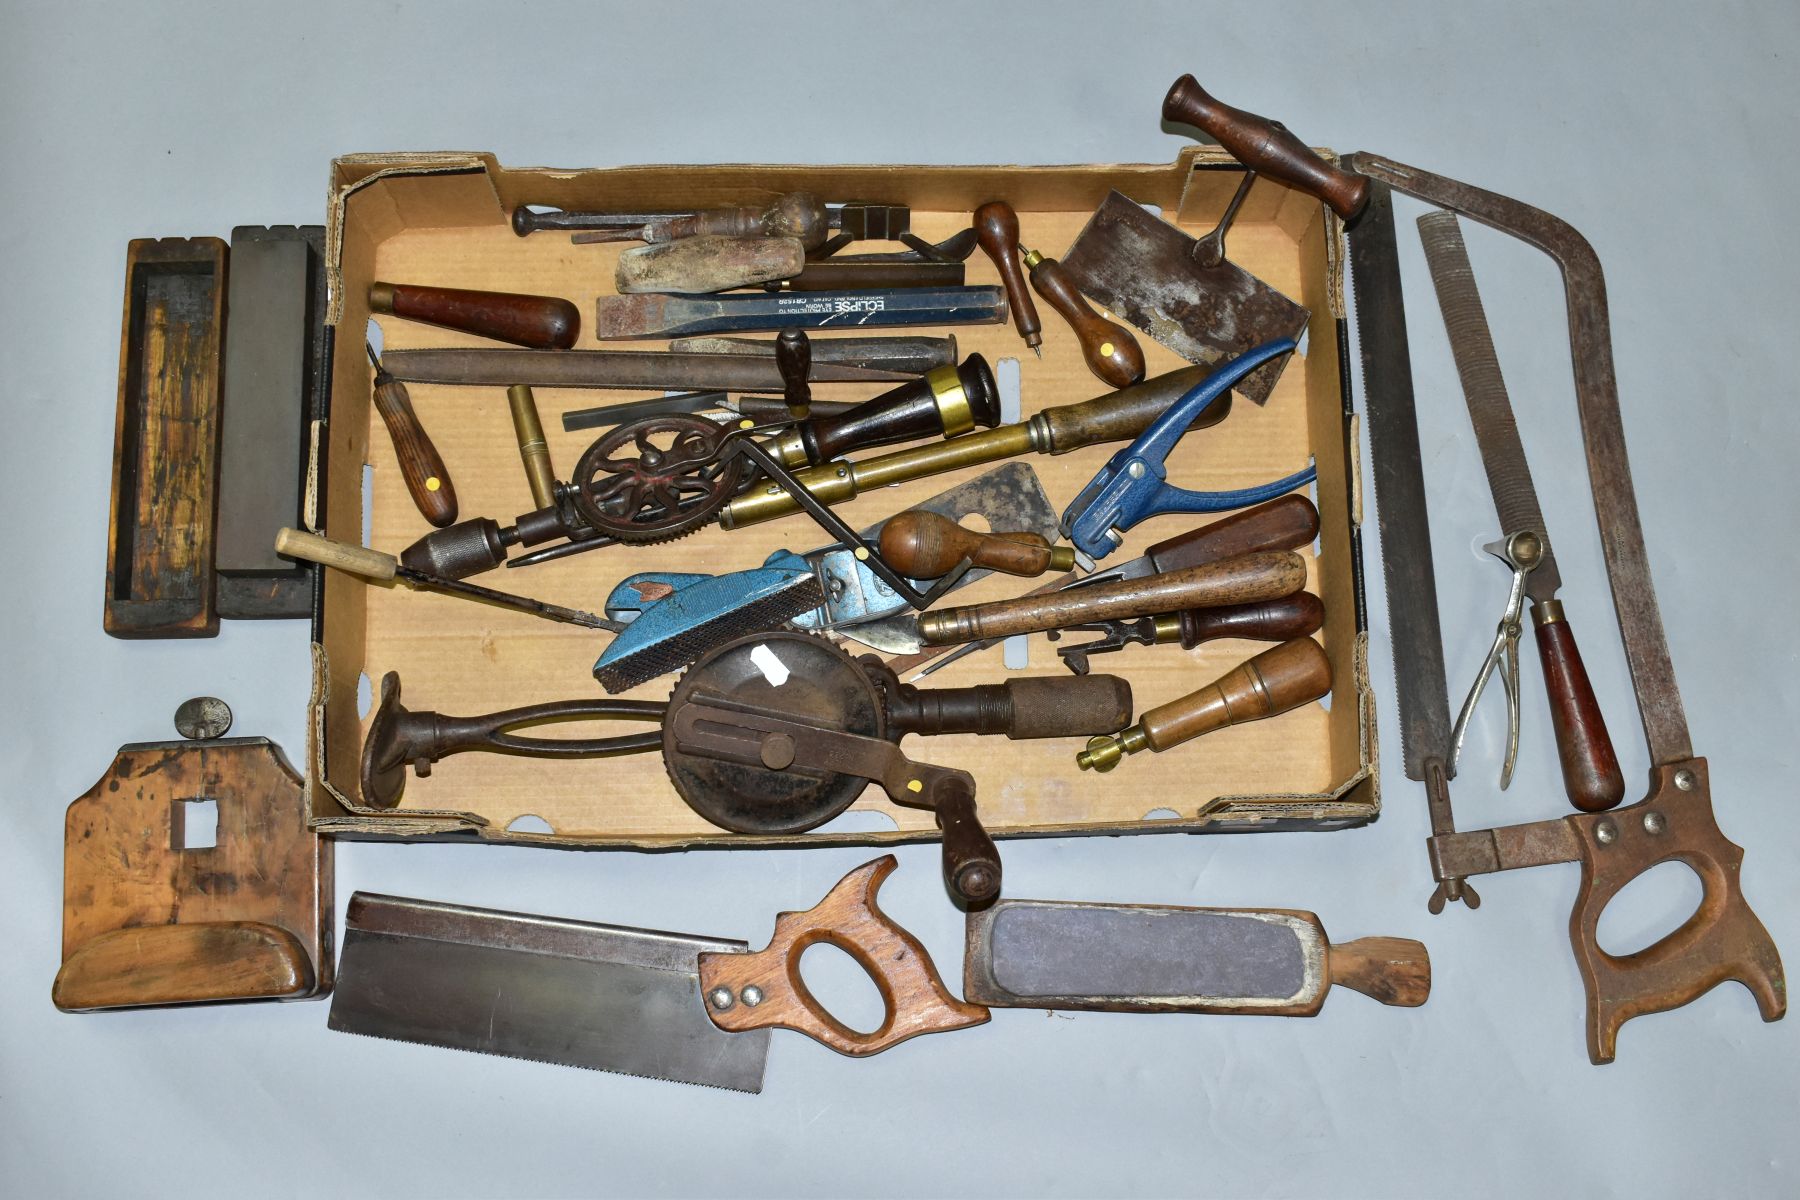 A TRAY CONTAINING VINTAGE HANDTOOLS including a North Bros Yankie, a Sycamore saw, a Stanley No